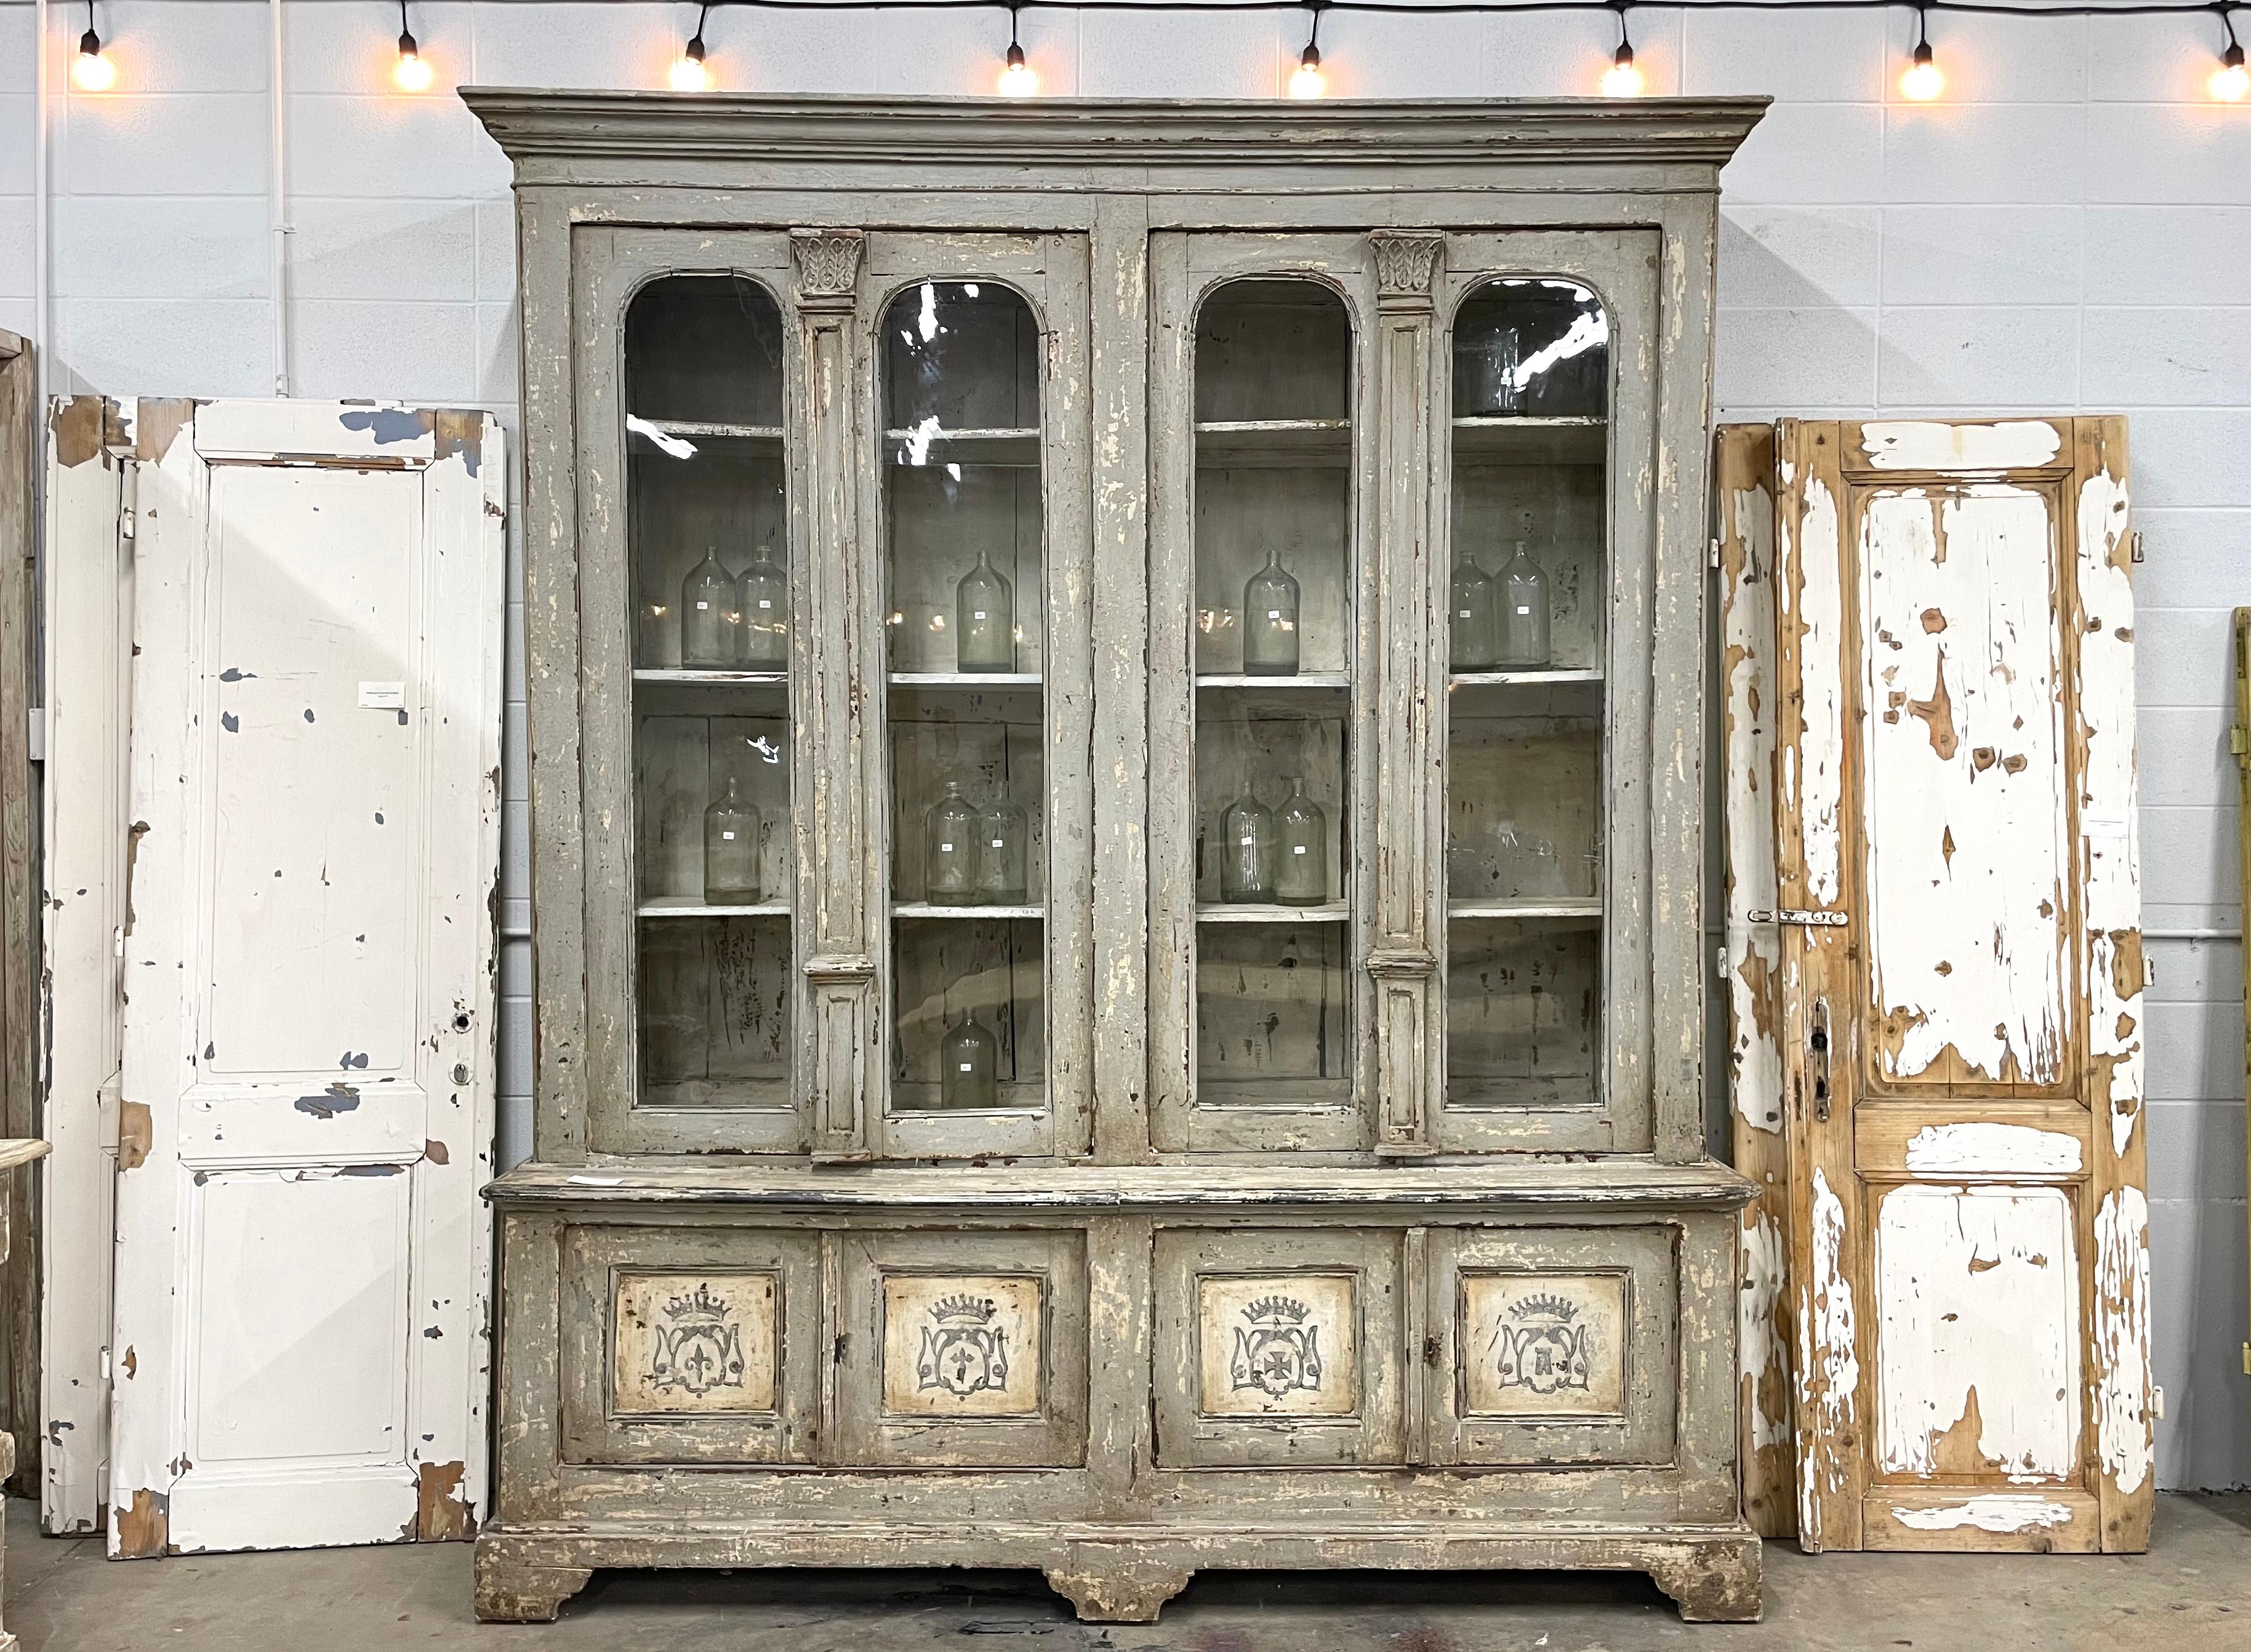 Beautiful substantial late 18th century Italian walnut cabinet or bookcase. The double pair of arched glazed doors with their original wavy glass sits above a pair of double cabinet doors.

The lovely distressed painted finish is likely to be a